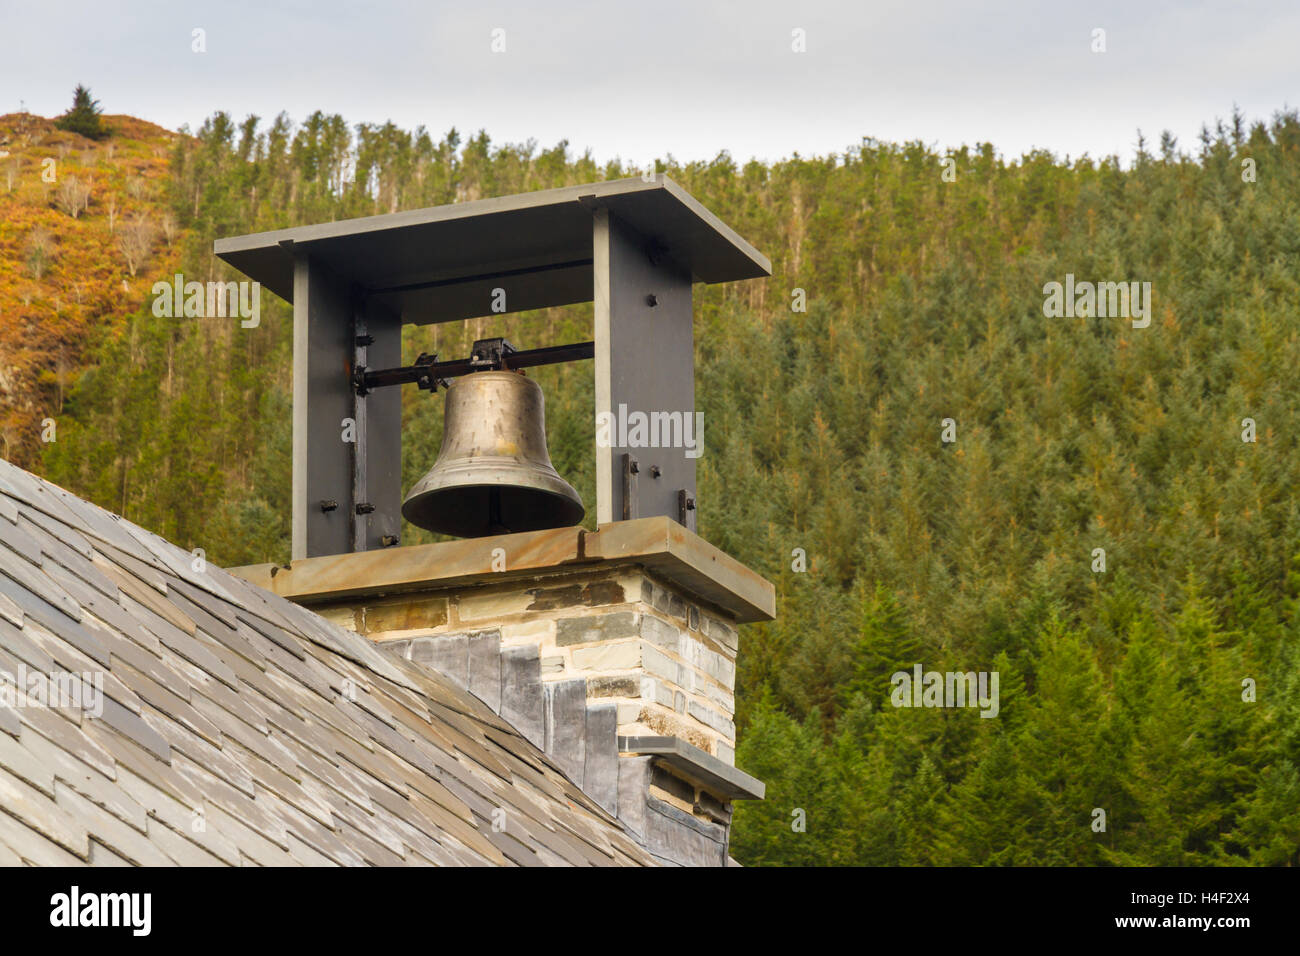 Small bell in tower Stock Photo